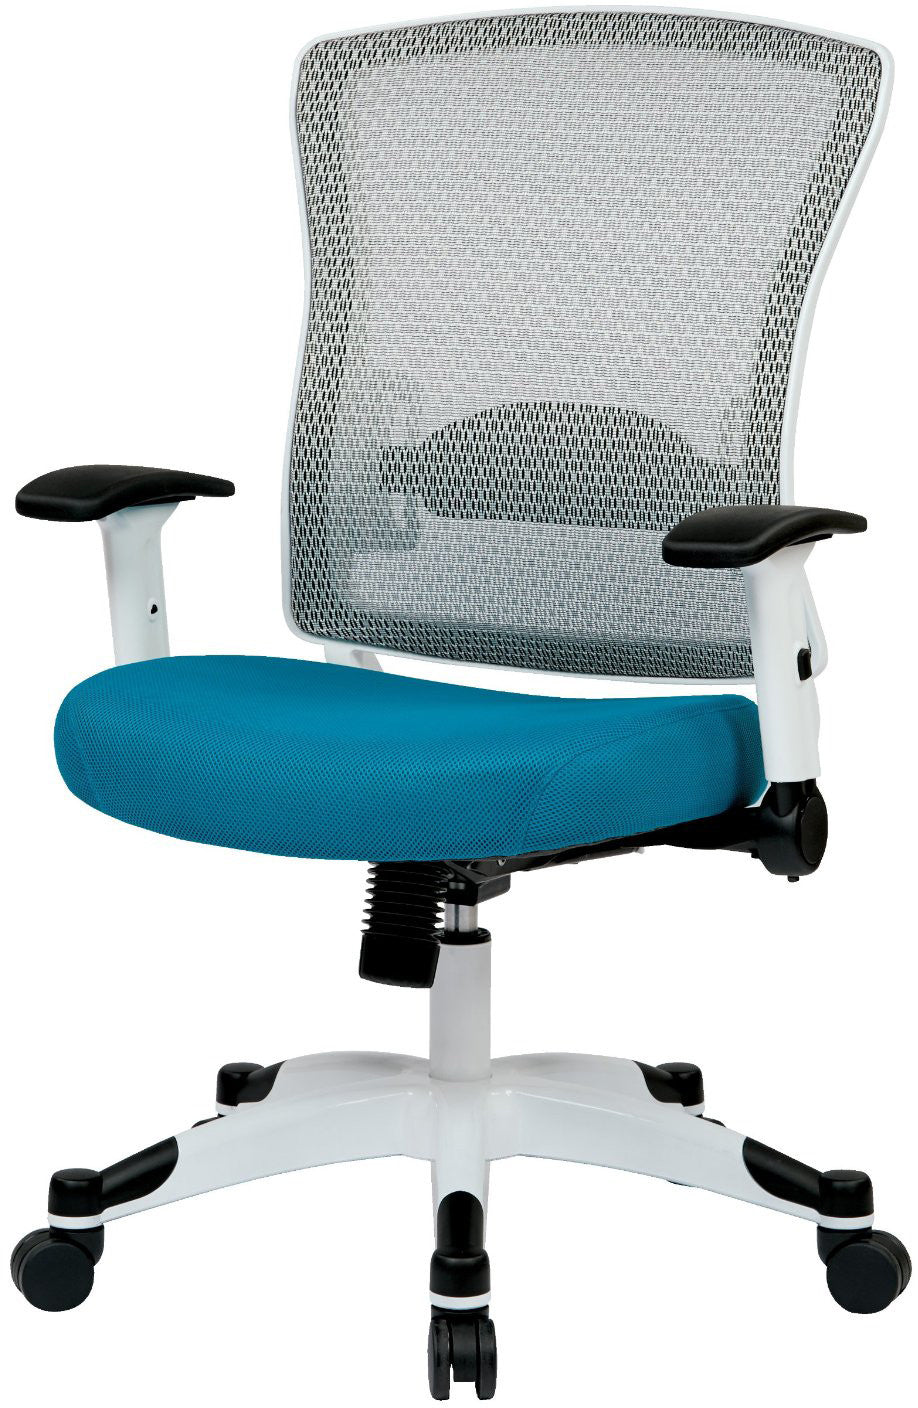 Space Seating 317w-w1c1f2w-7 White Frame Managers Chair (blue)